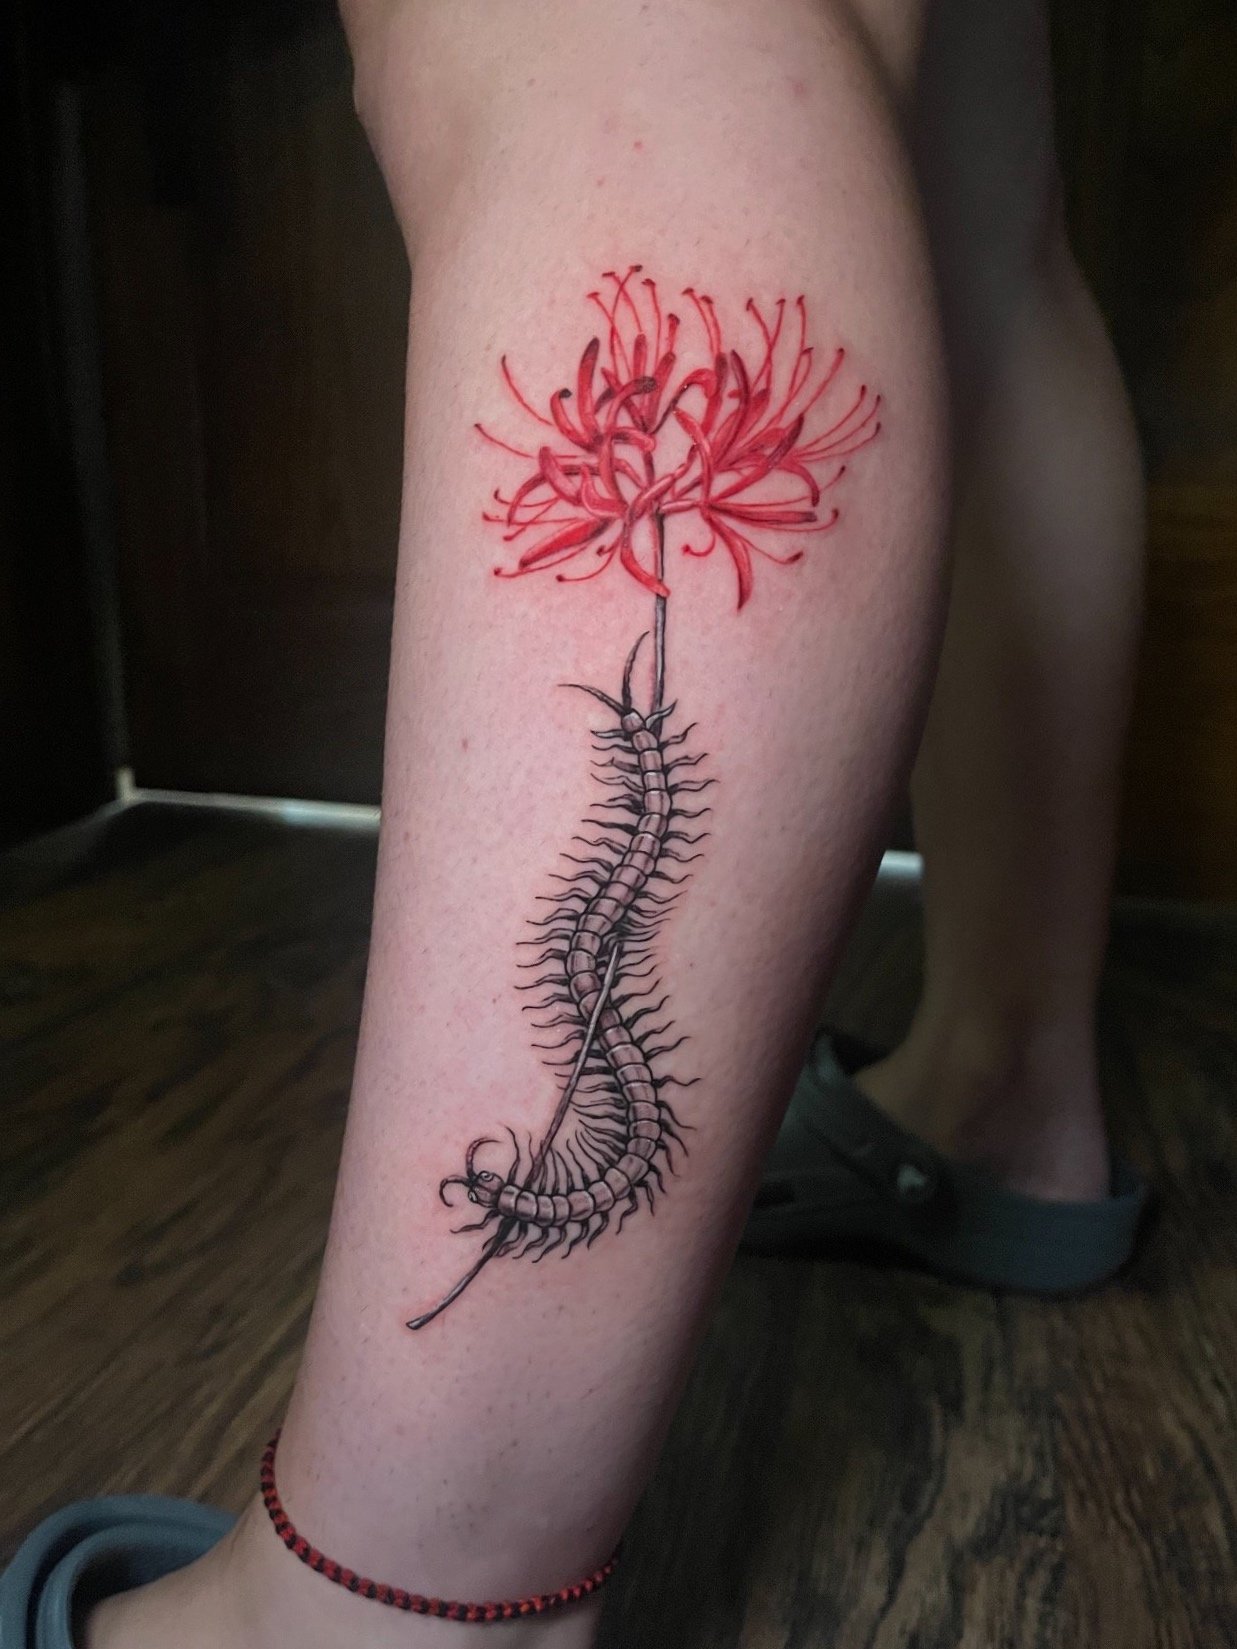 Tattoos by Keith Harstad  red spider lily and white carnation inspired  from Tokyo Ghoul animetattoo tokyoghoul higanbanatattoo colortattoos  colortattoo floraltattoos lexingtontattoo lexingtontattooartist  lexingtonkentucky 